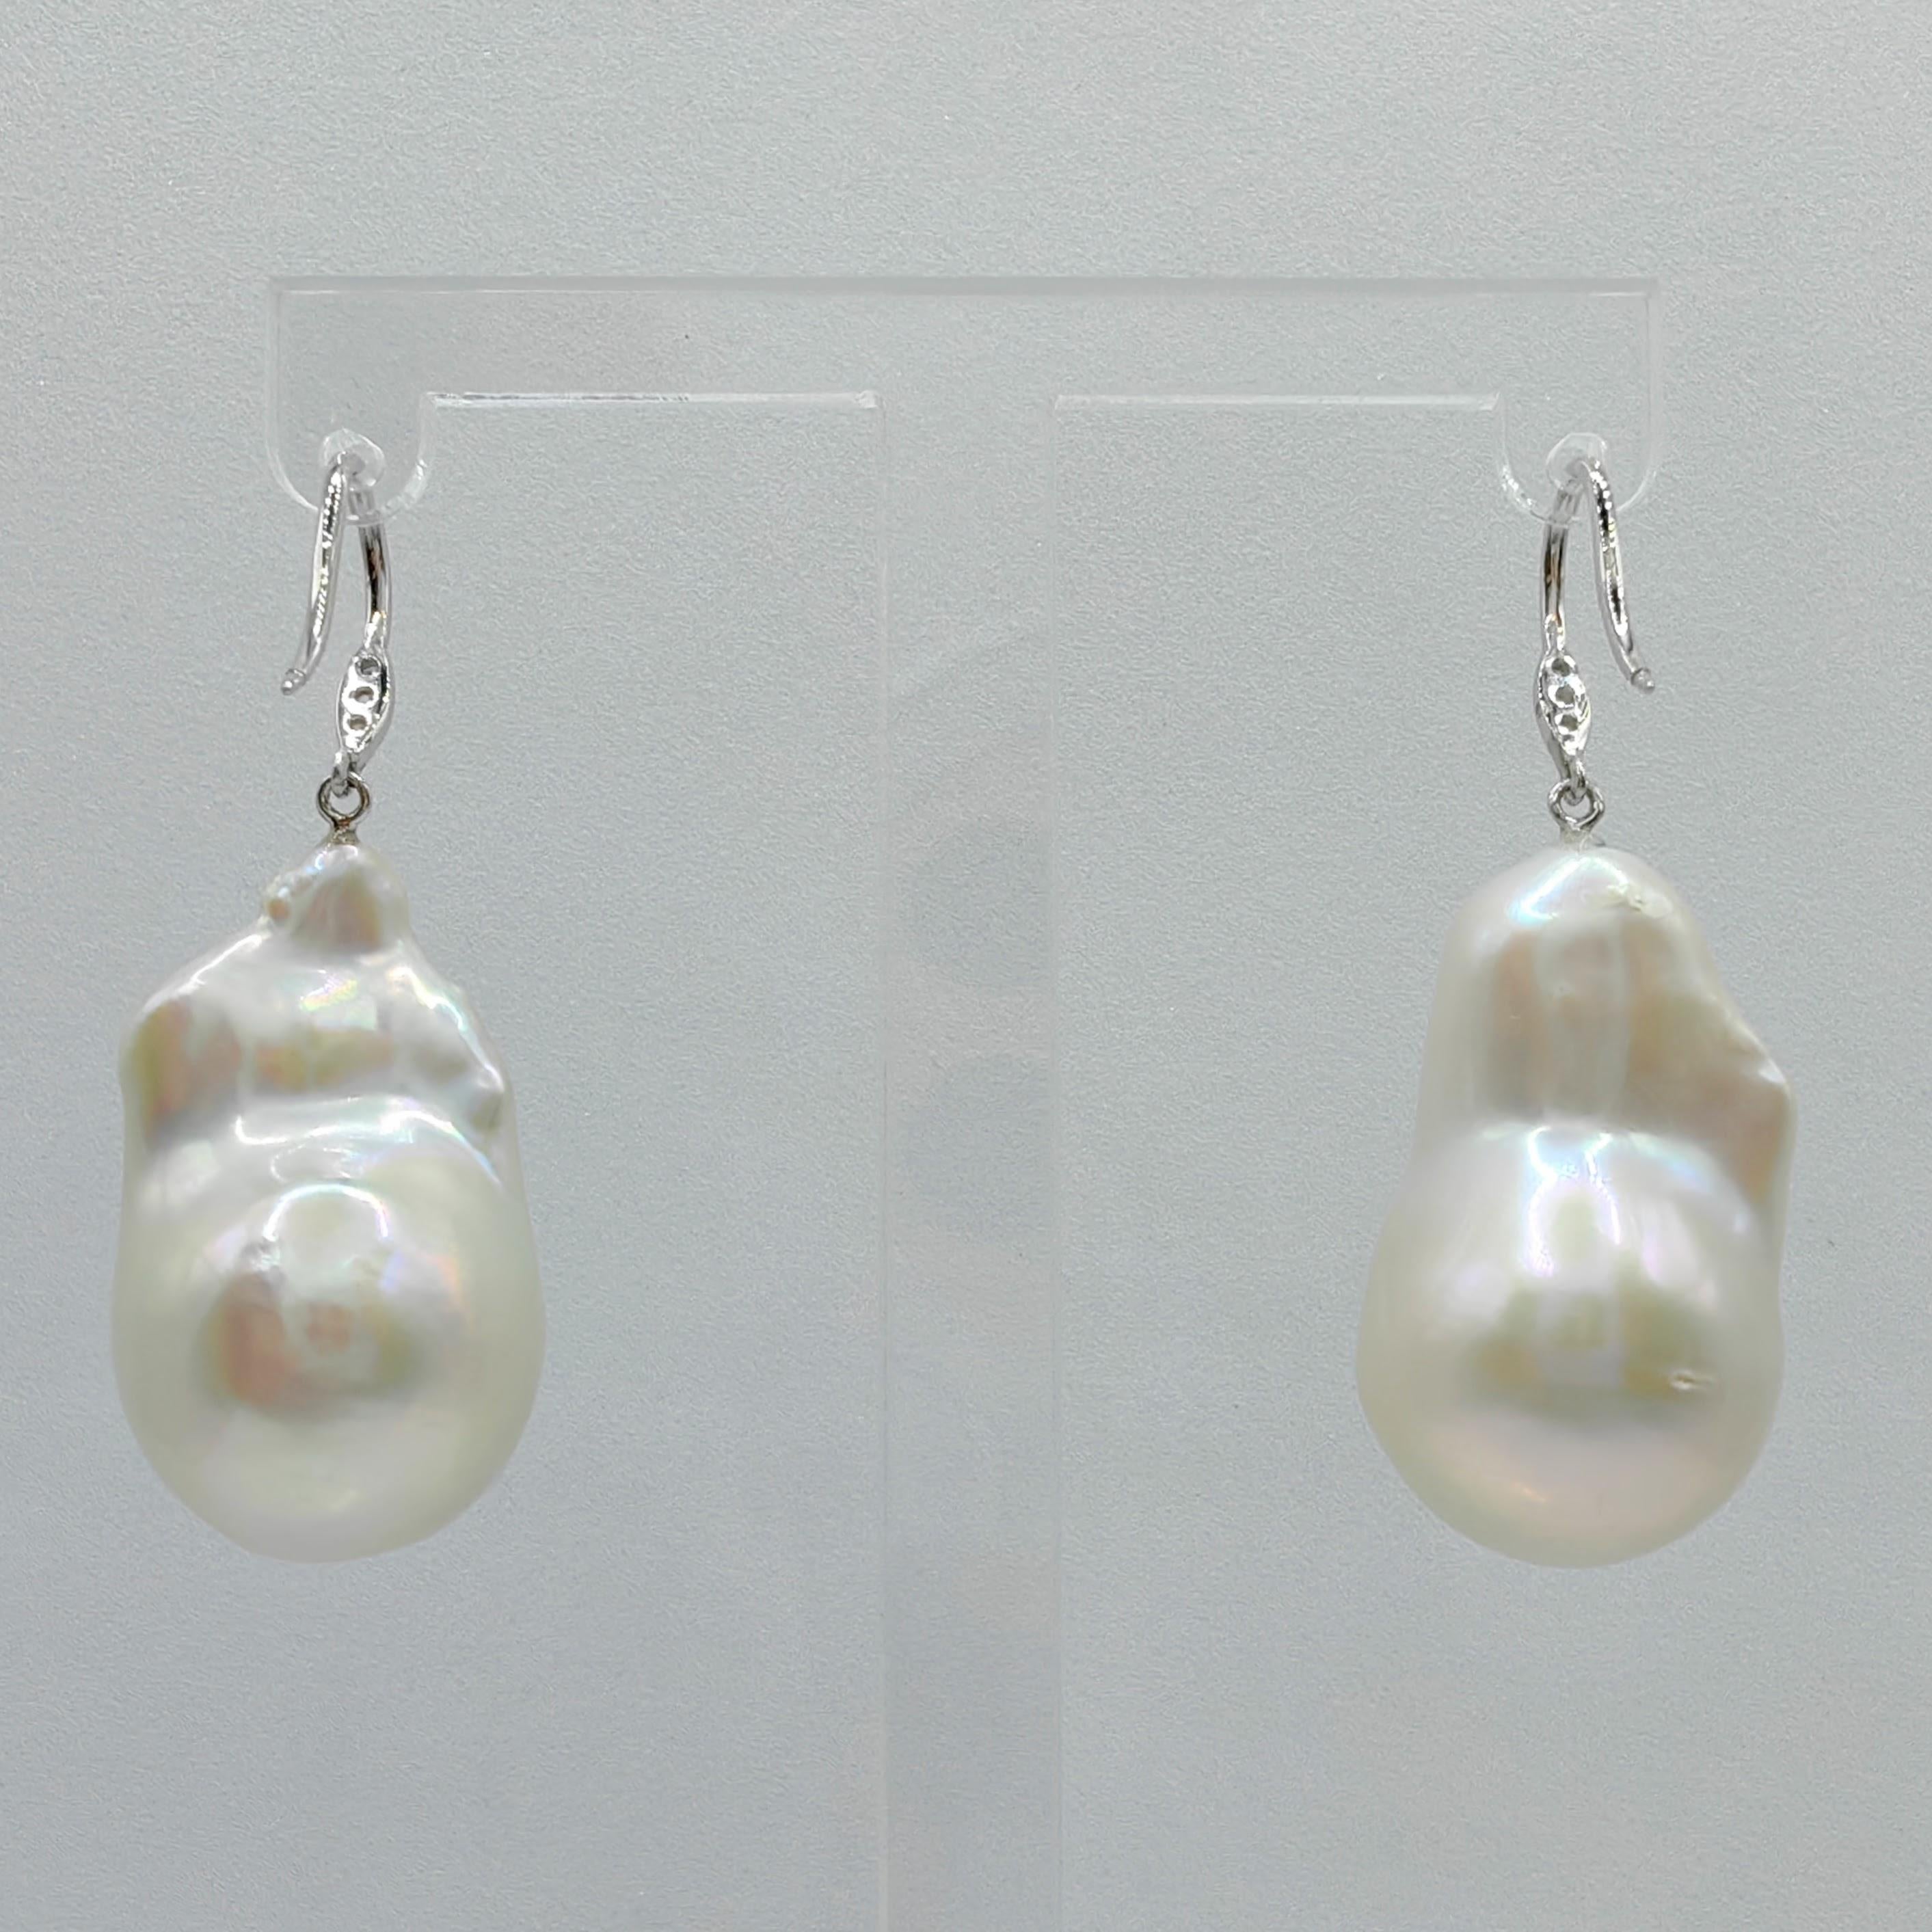 Baroque Pearl Diamond Dangling Drop Earrings With 18K White Gold French Hooks In New Condition For Sale In Wan Chai District, HK